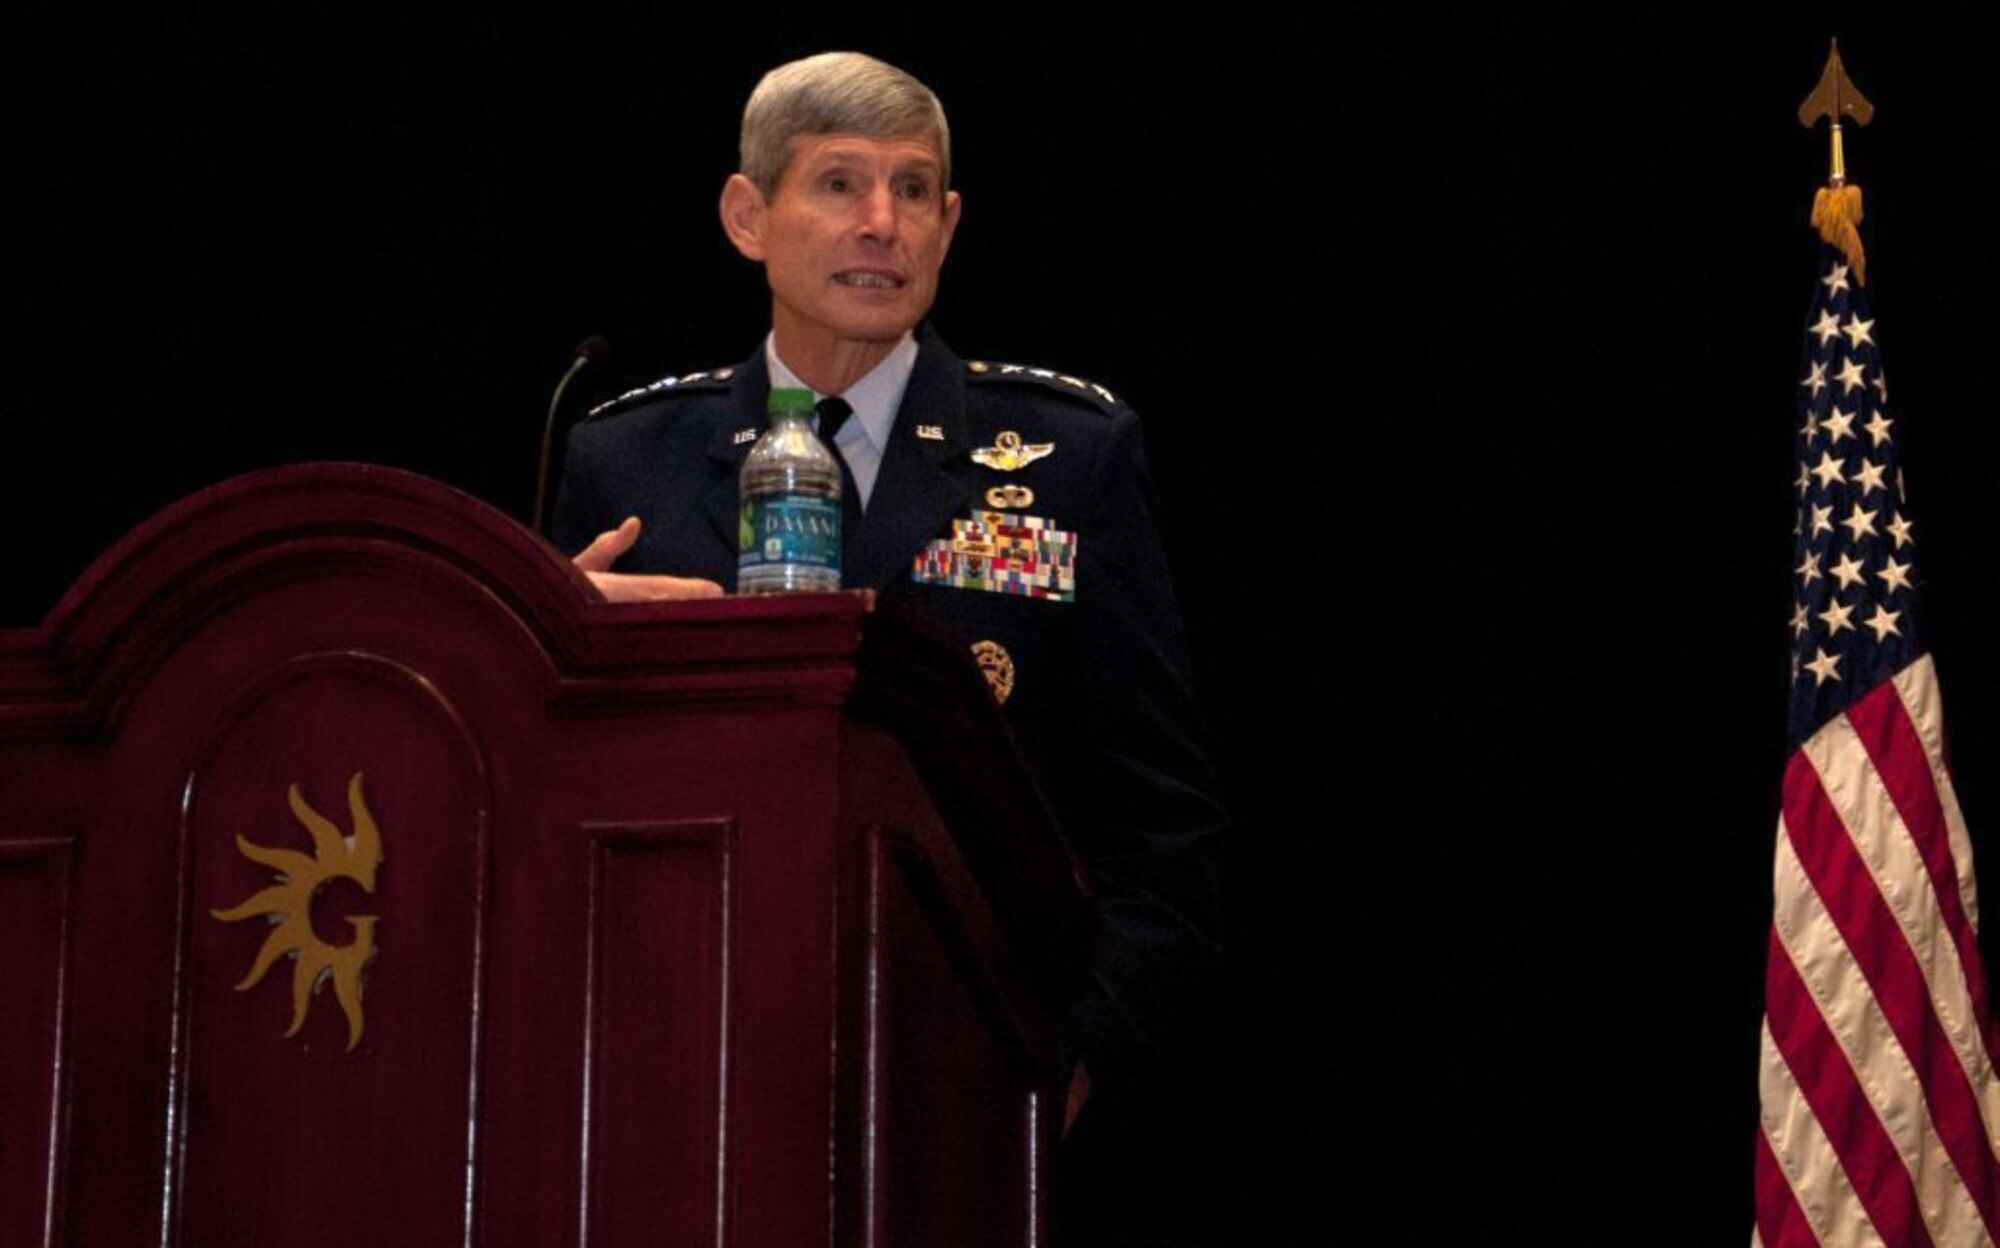 Air Force Chief of Staff Gen. Norton Schwartz discusses recent service budget during Air Force Reserve Command's 2012 Senior Leader Conference March 26, 2012, at the Gaylord Hotel in National Harbor, Md.  This year's SLC theme was "Full Operational Capability: Full Spectrum Combat Capability with Unparalleled Efficiency," and how the Reserve fits into the big picture of a Total Force. (U.S. Air Force photo/Senior Airman Katie Spencer)
